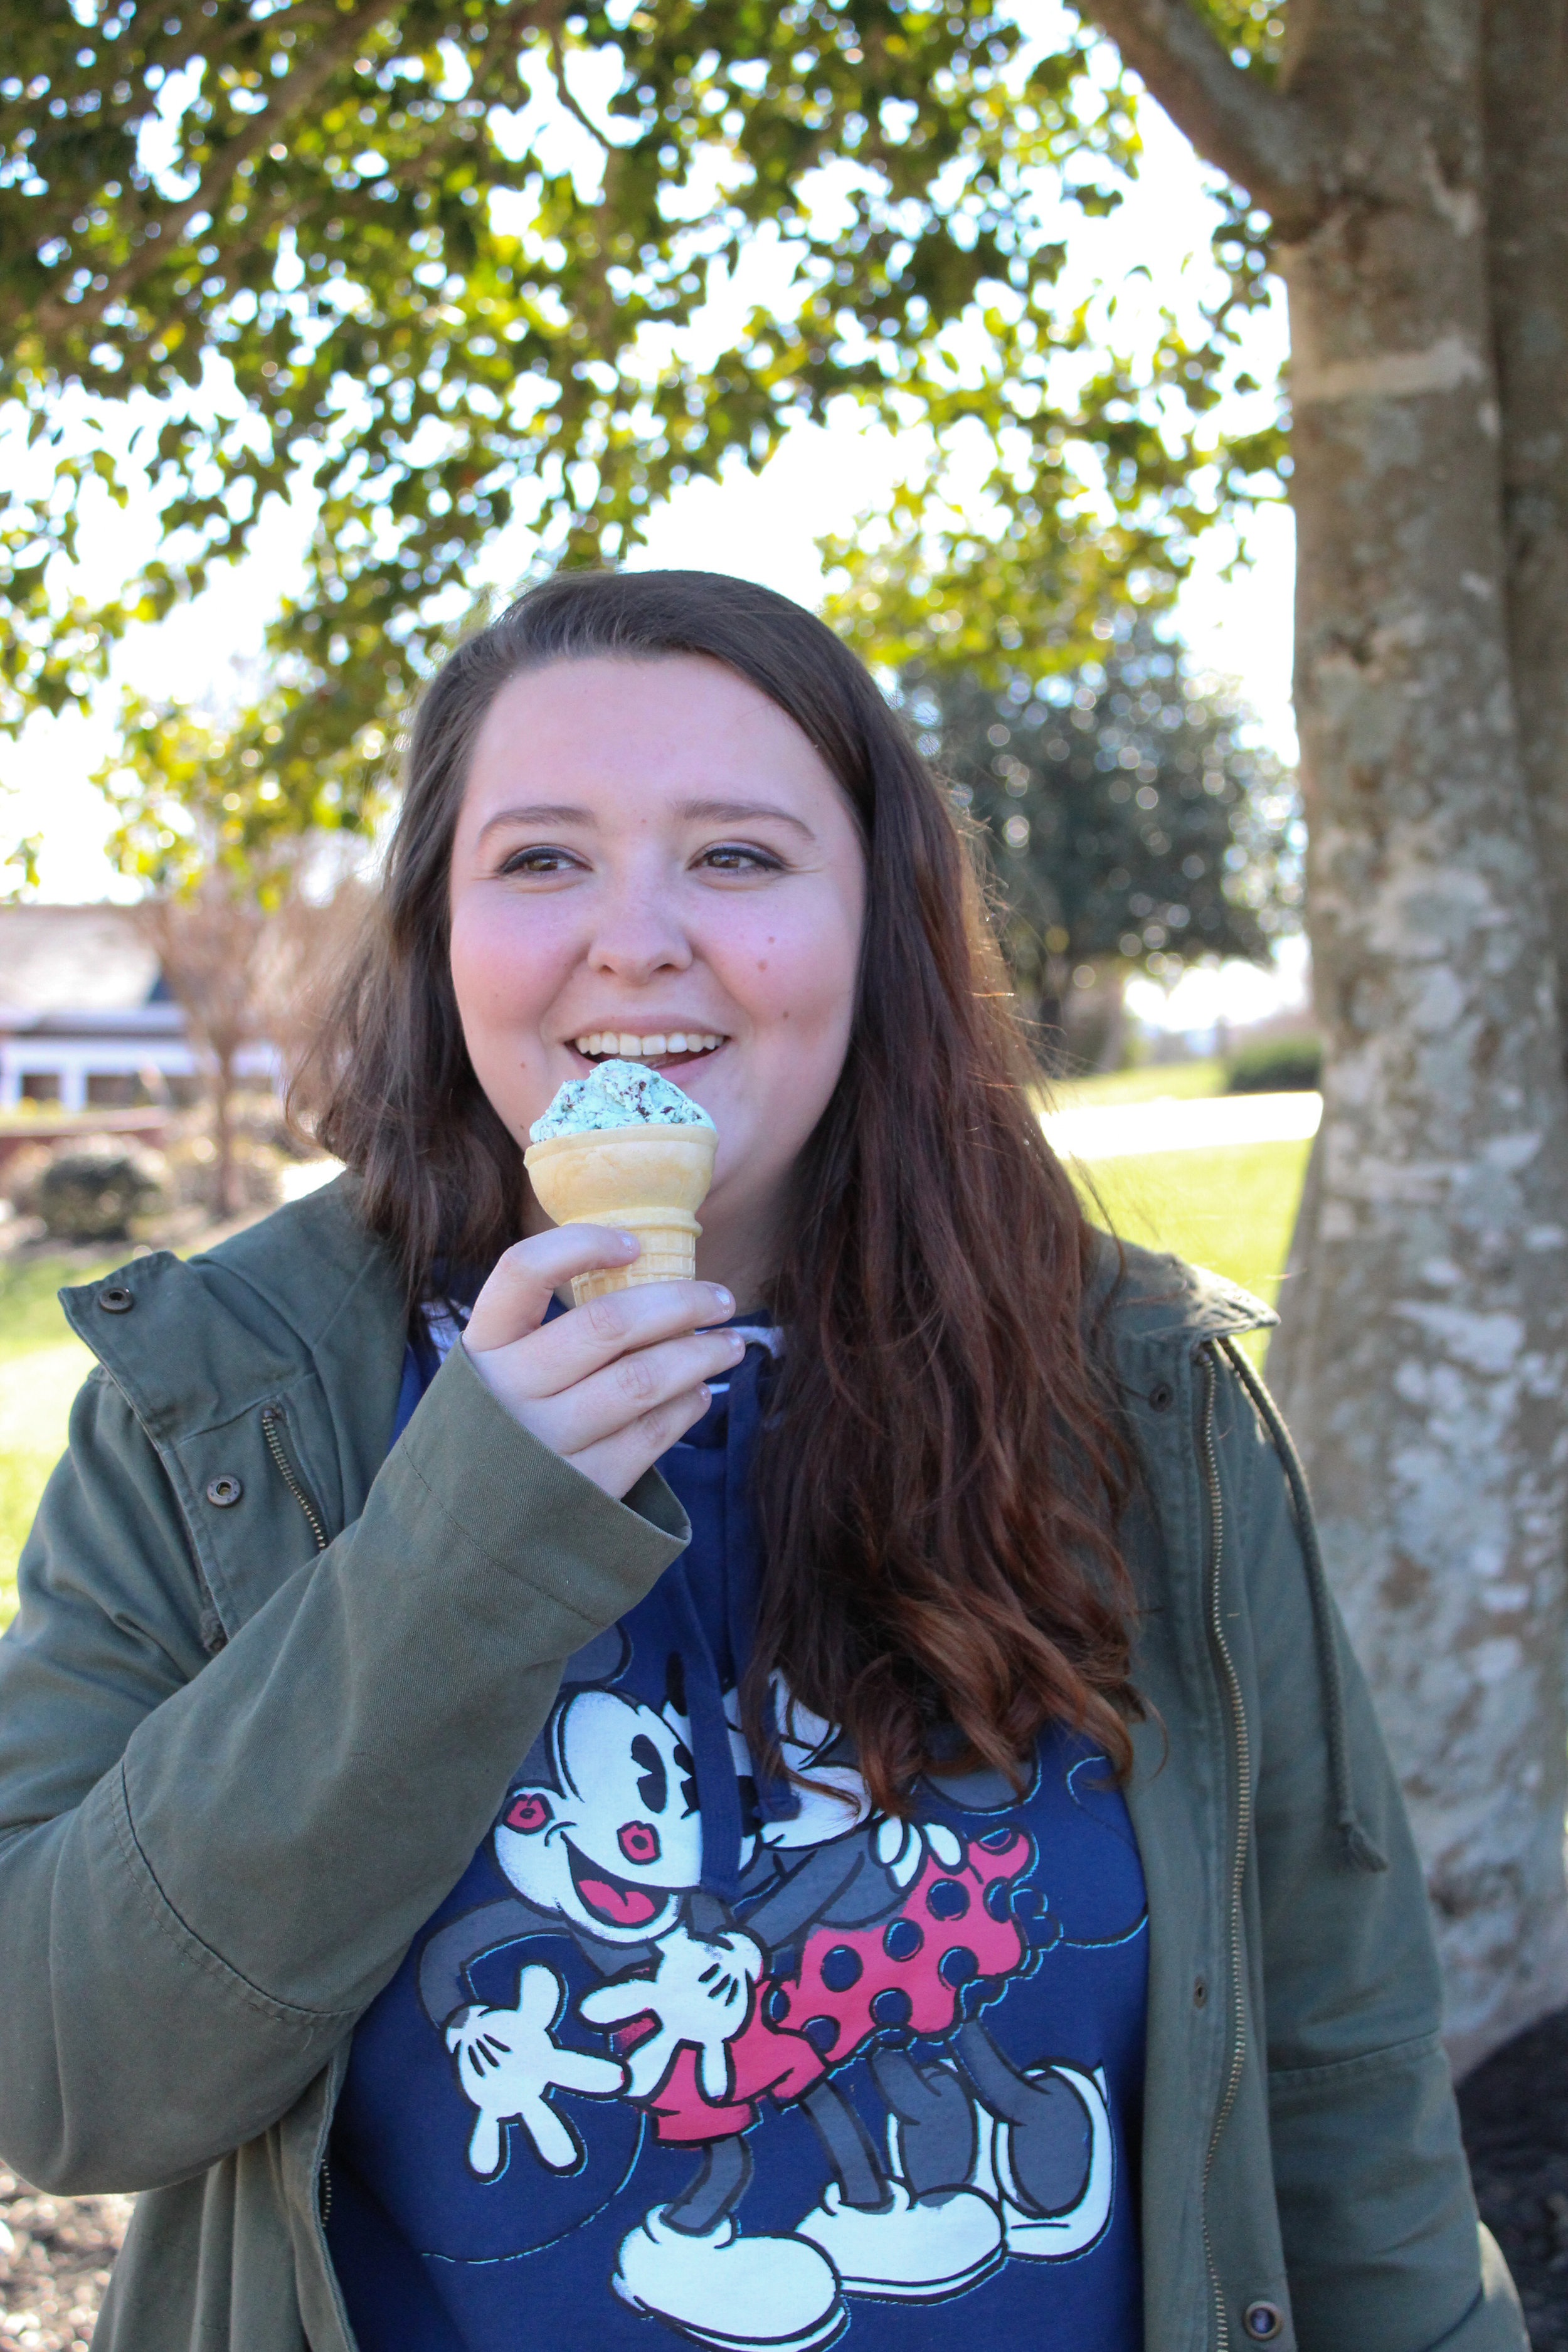 After leaving the Caf, junior Shelby Jones eats her mint chocolate chip ice cream.